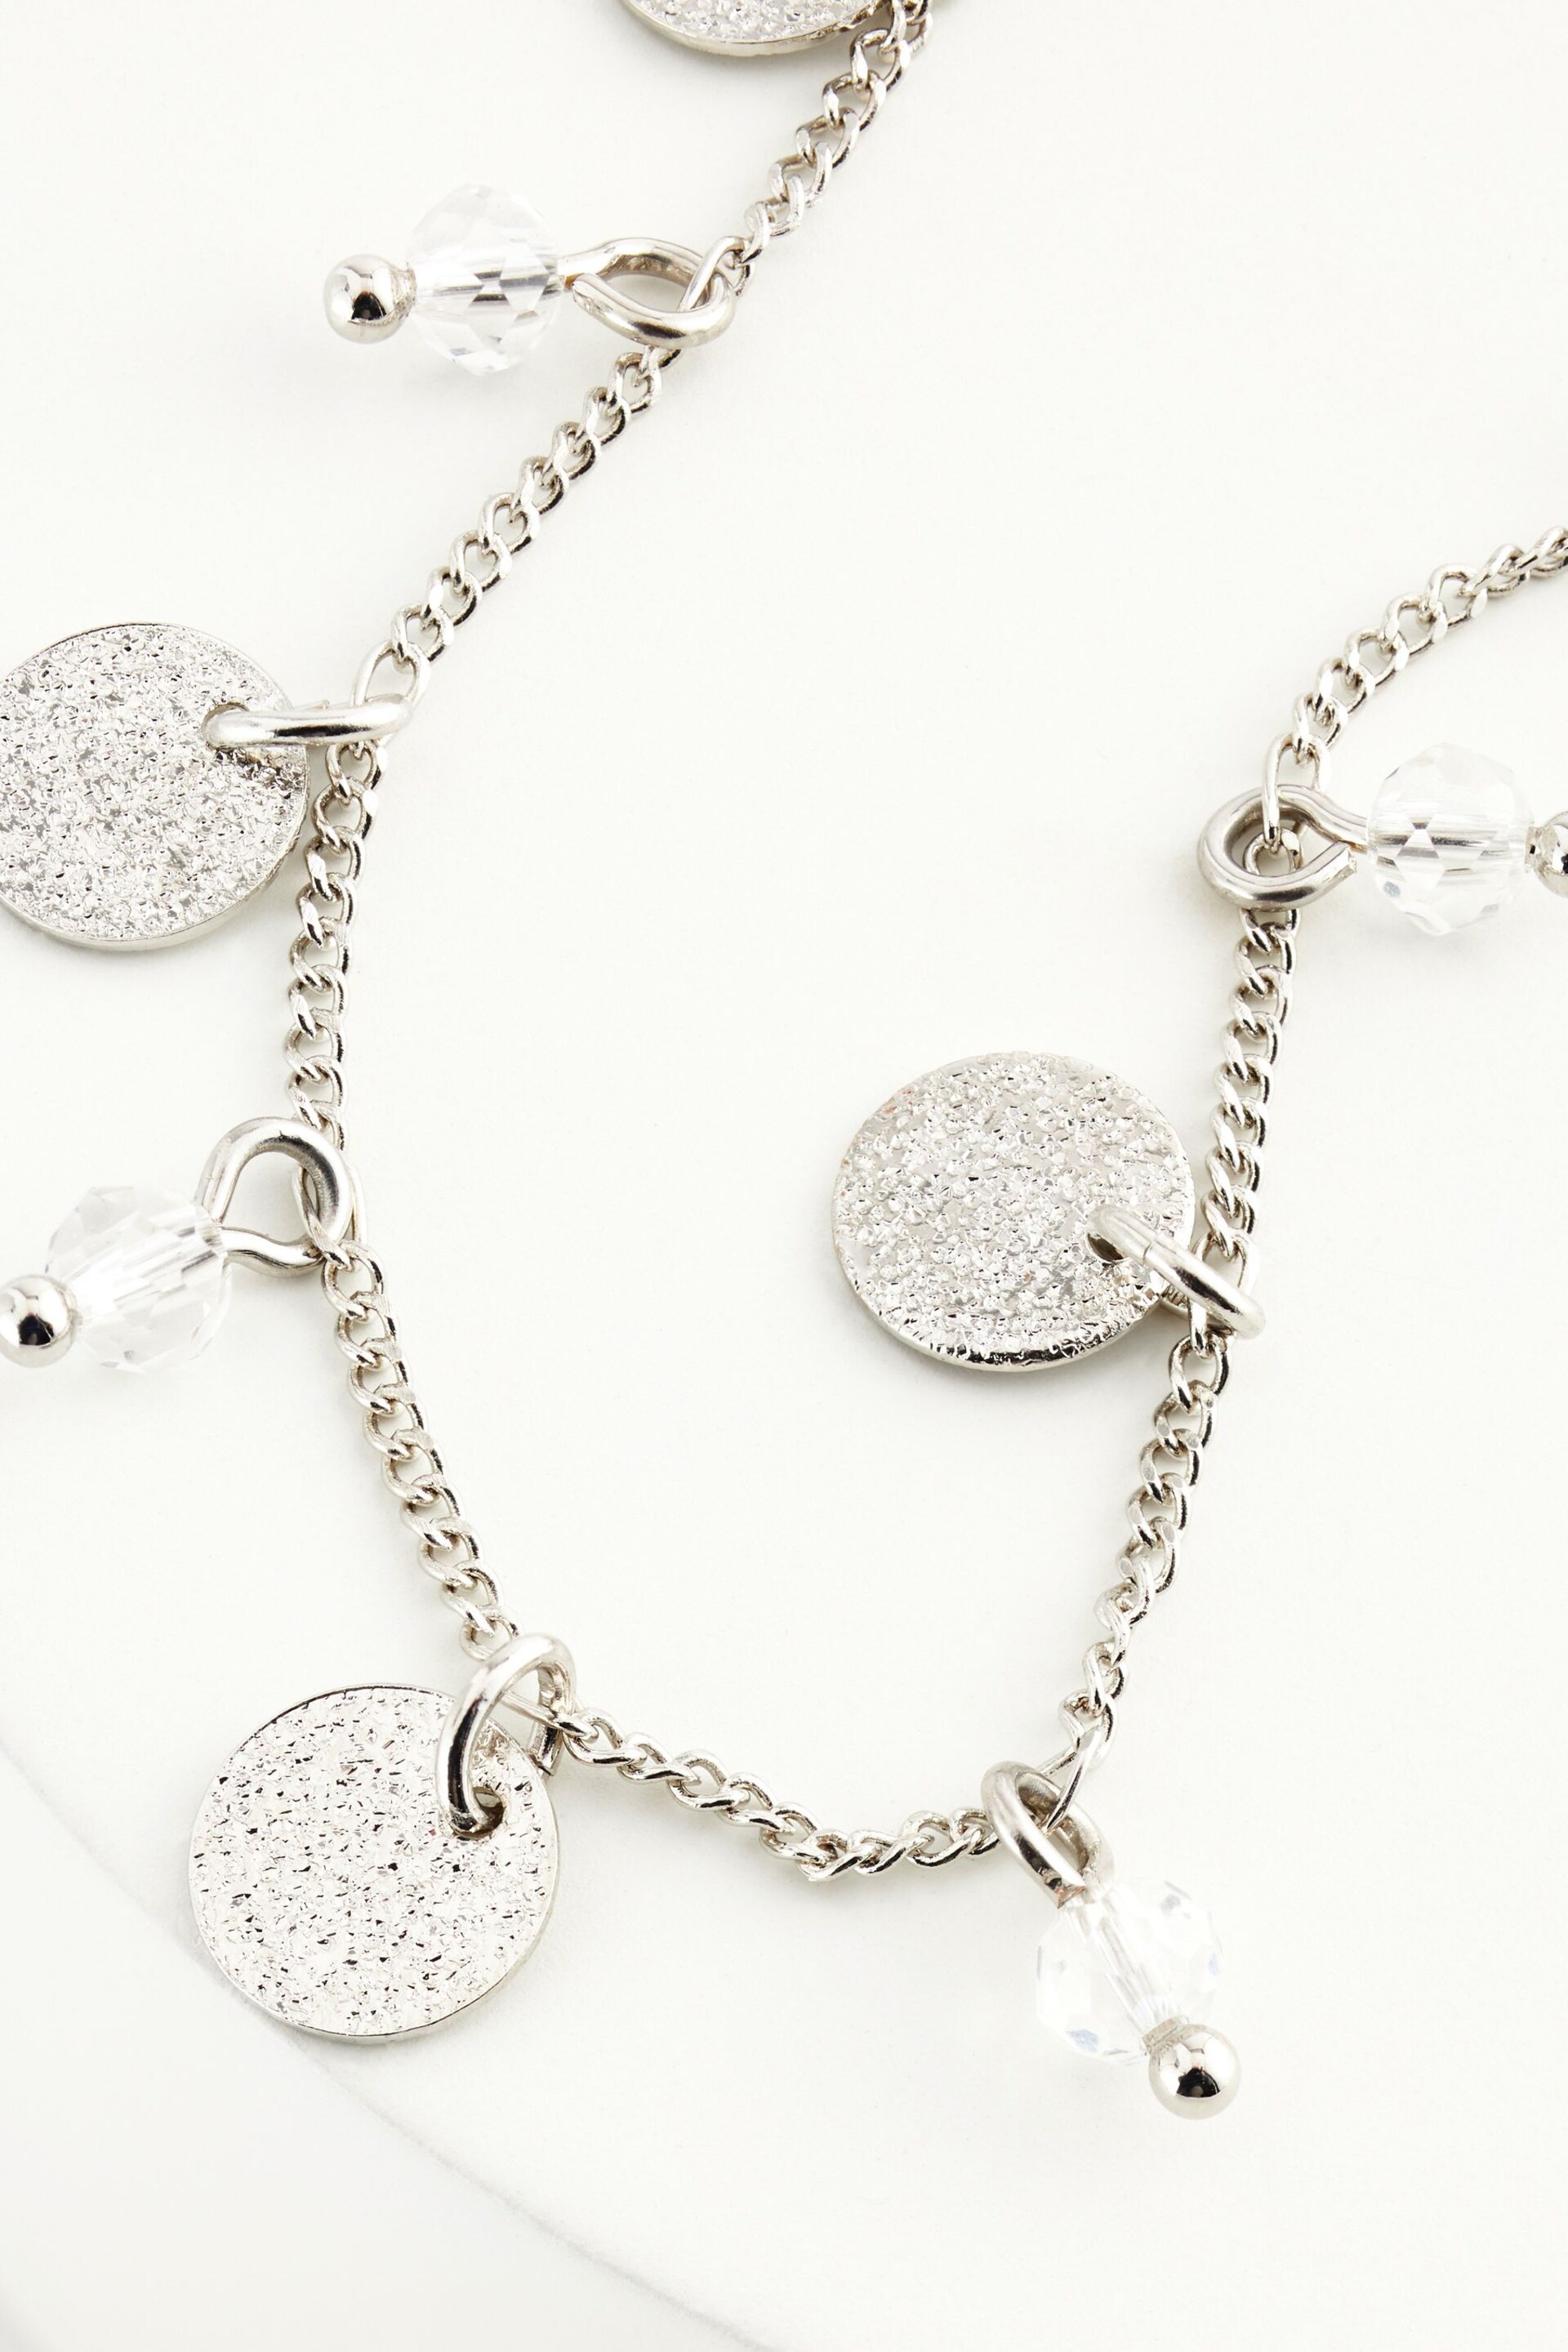 Silver Tone Disc Anklet - Image 2 of 4